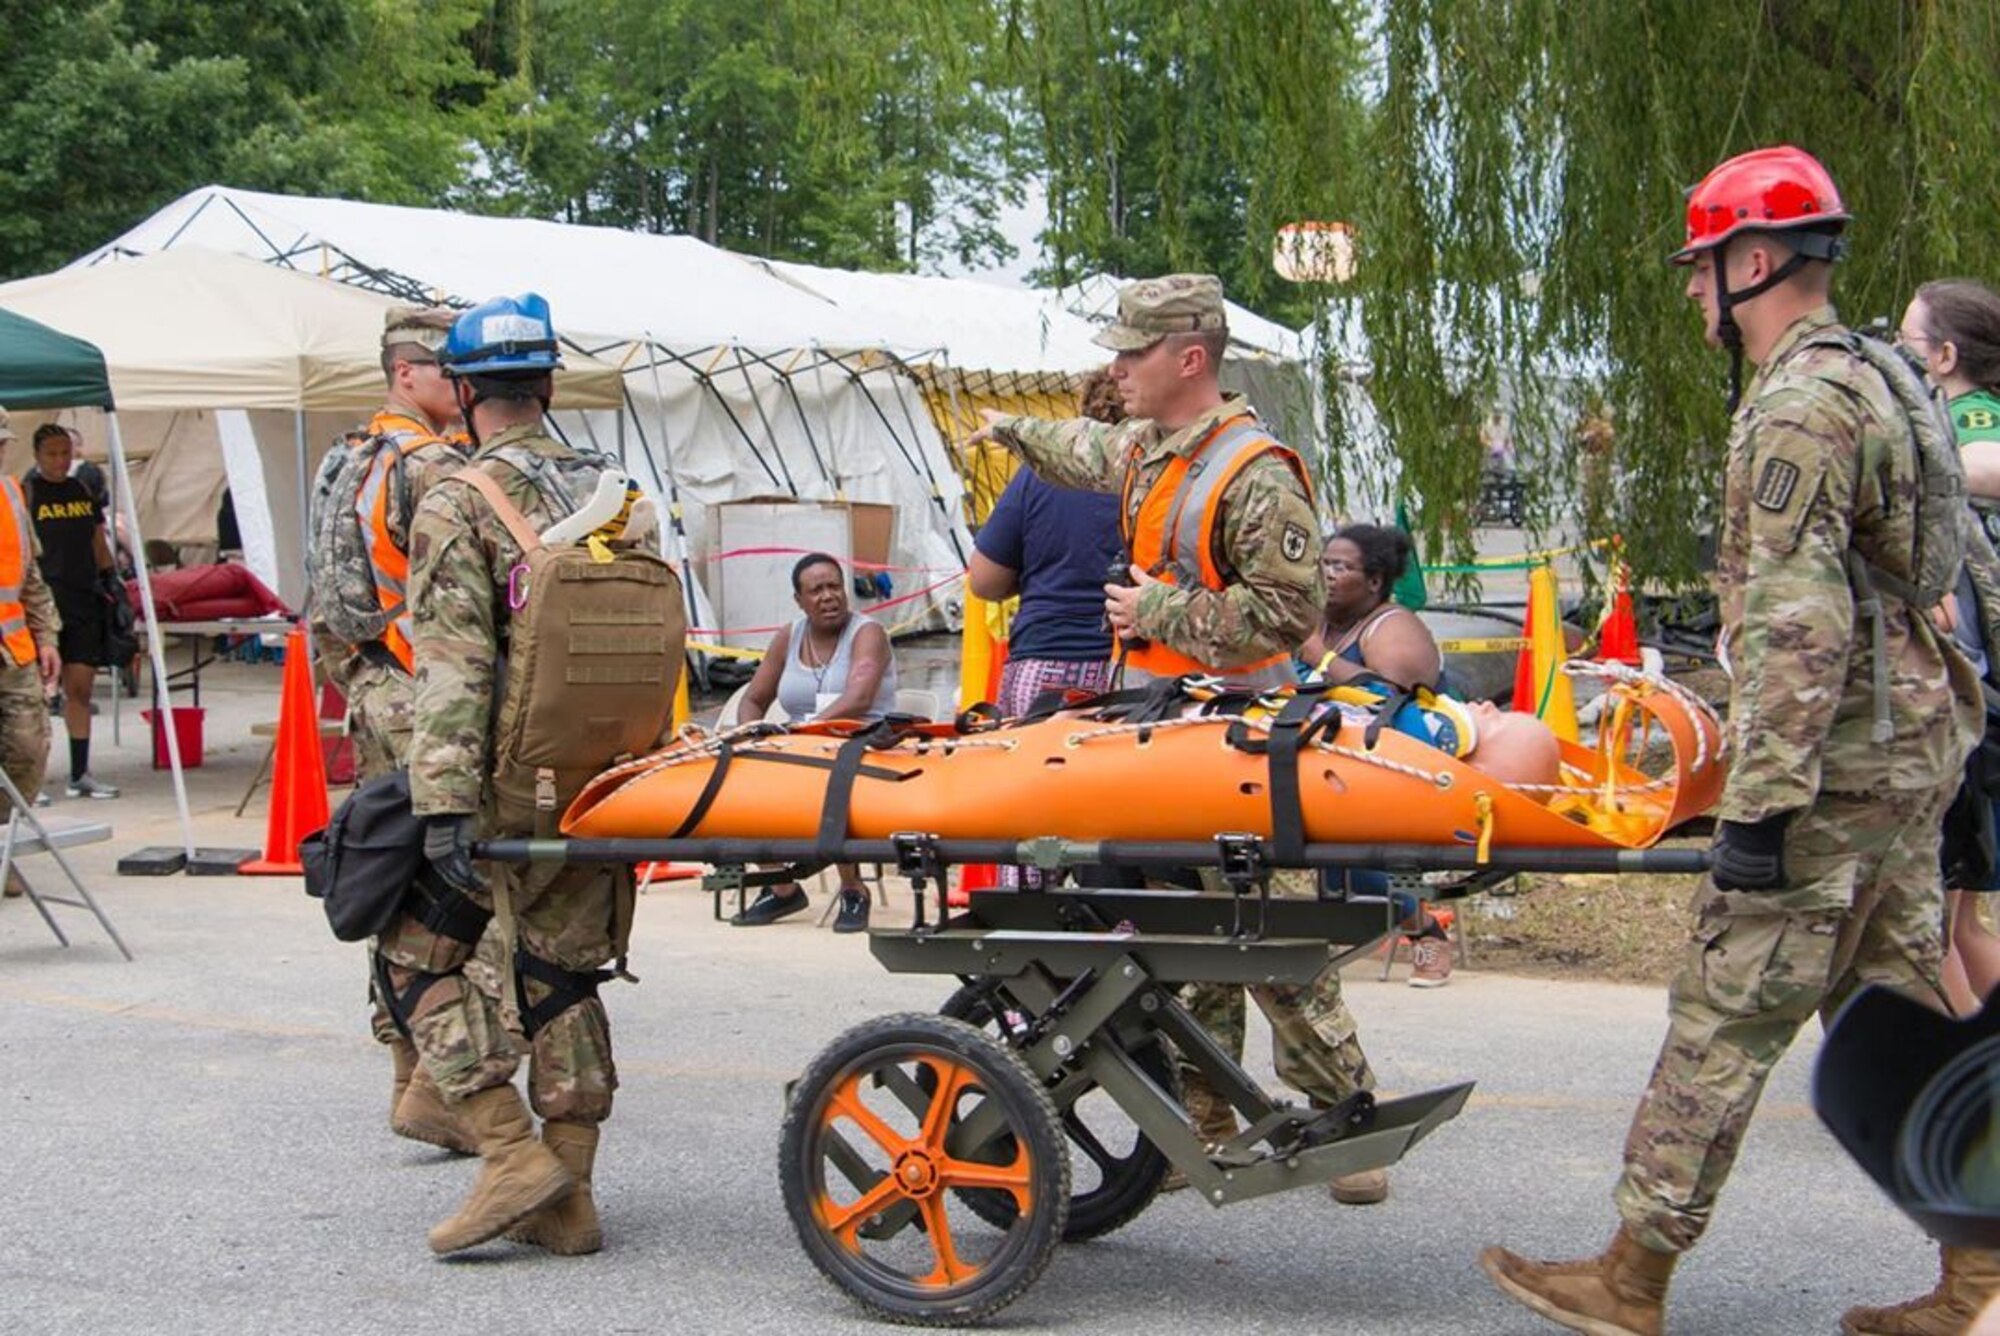 Members of the Delaware National Guard participate in Operation HIGHBALL, July 12, 2019 in New Castle, Del. The exercise provides realistic joint training and evaluation opportunities for both the Army and Air National Guard Drill Status Guardsmen in units that may be called upon to support civilian authorities at the tactical and operational level in a domestic operation. (U.S. National Guard Photo by Mr. Bernie Kale)